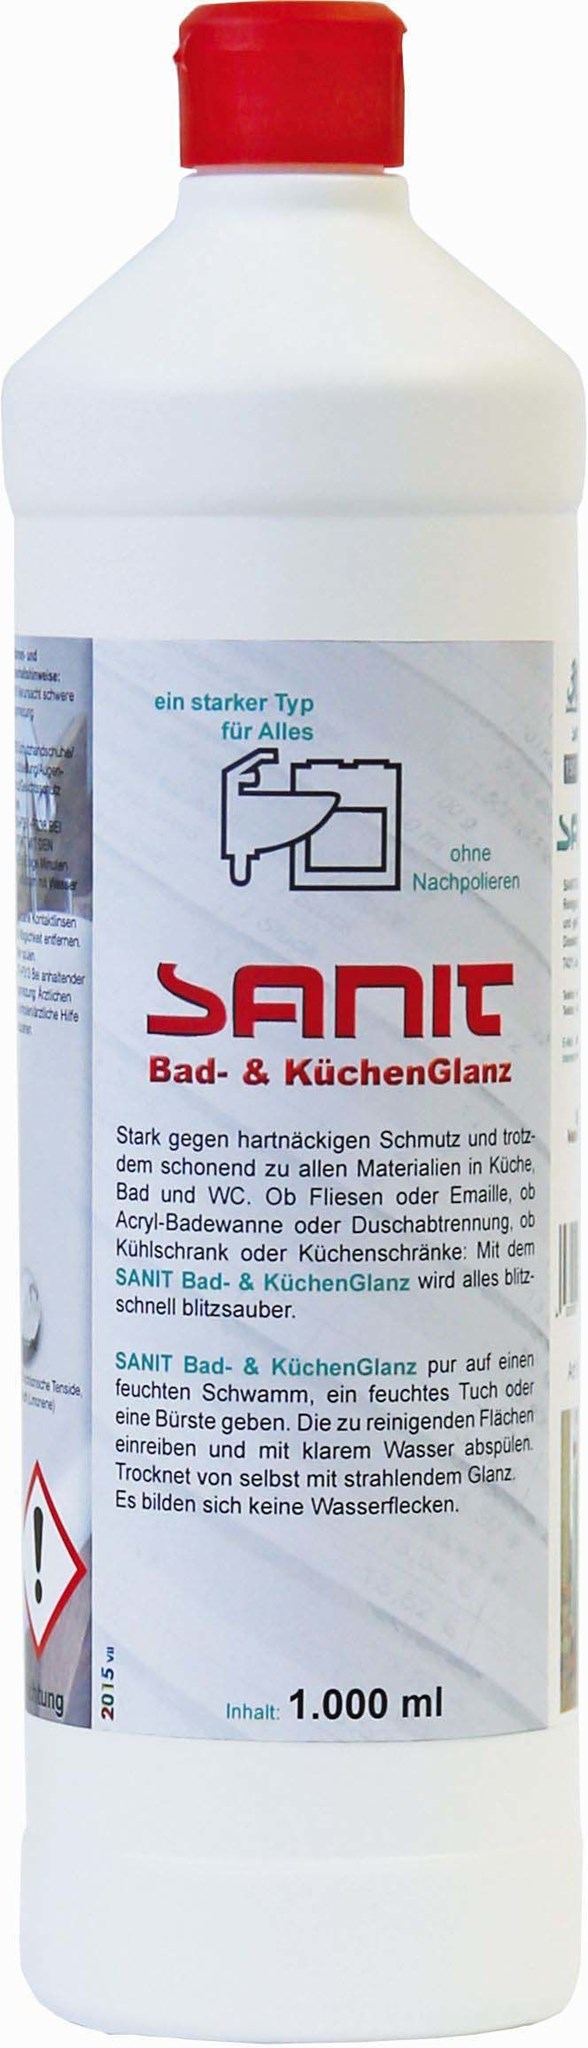 Picture of SANIT Bad- & KüchenGlanz Clean & Polish 1000 ml 3041